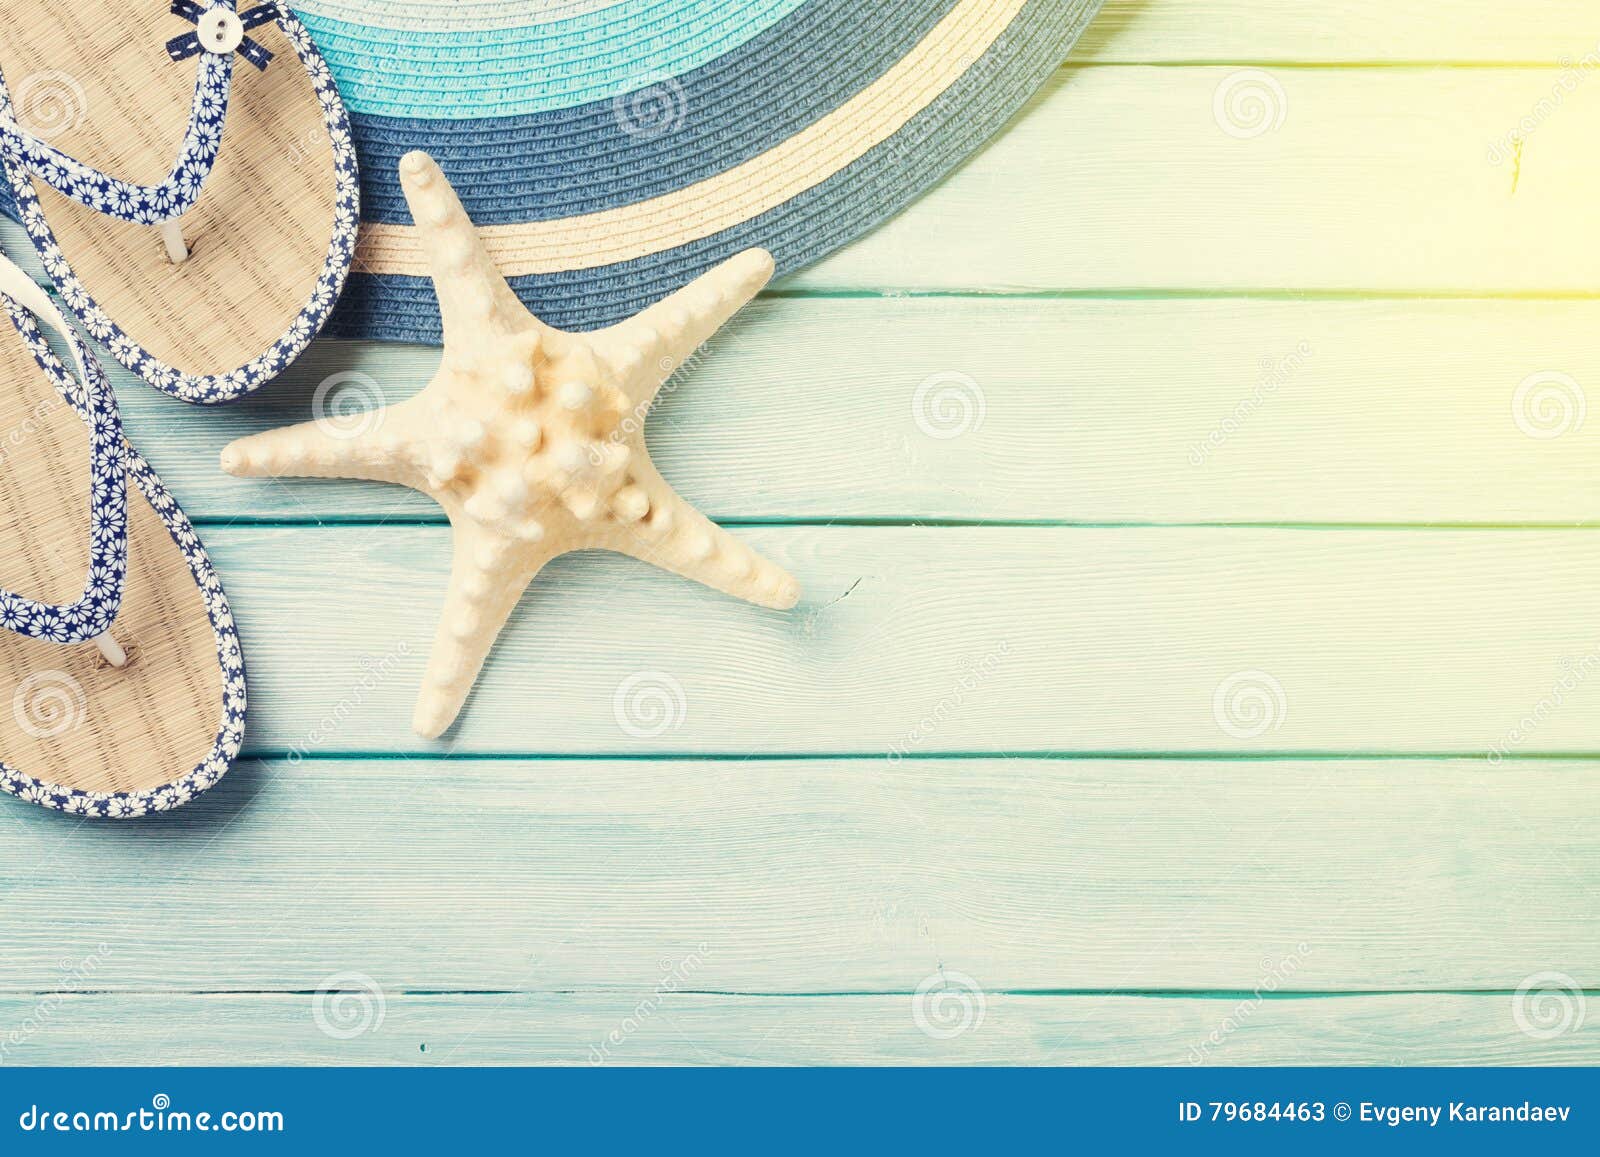 Beach Accessories on Wooden Background Stock Image - Image of plank ...